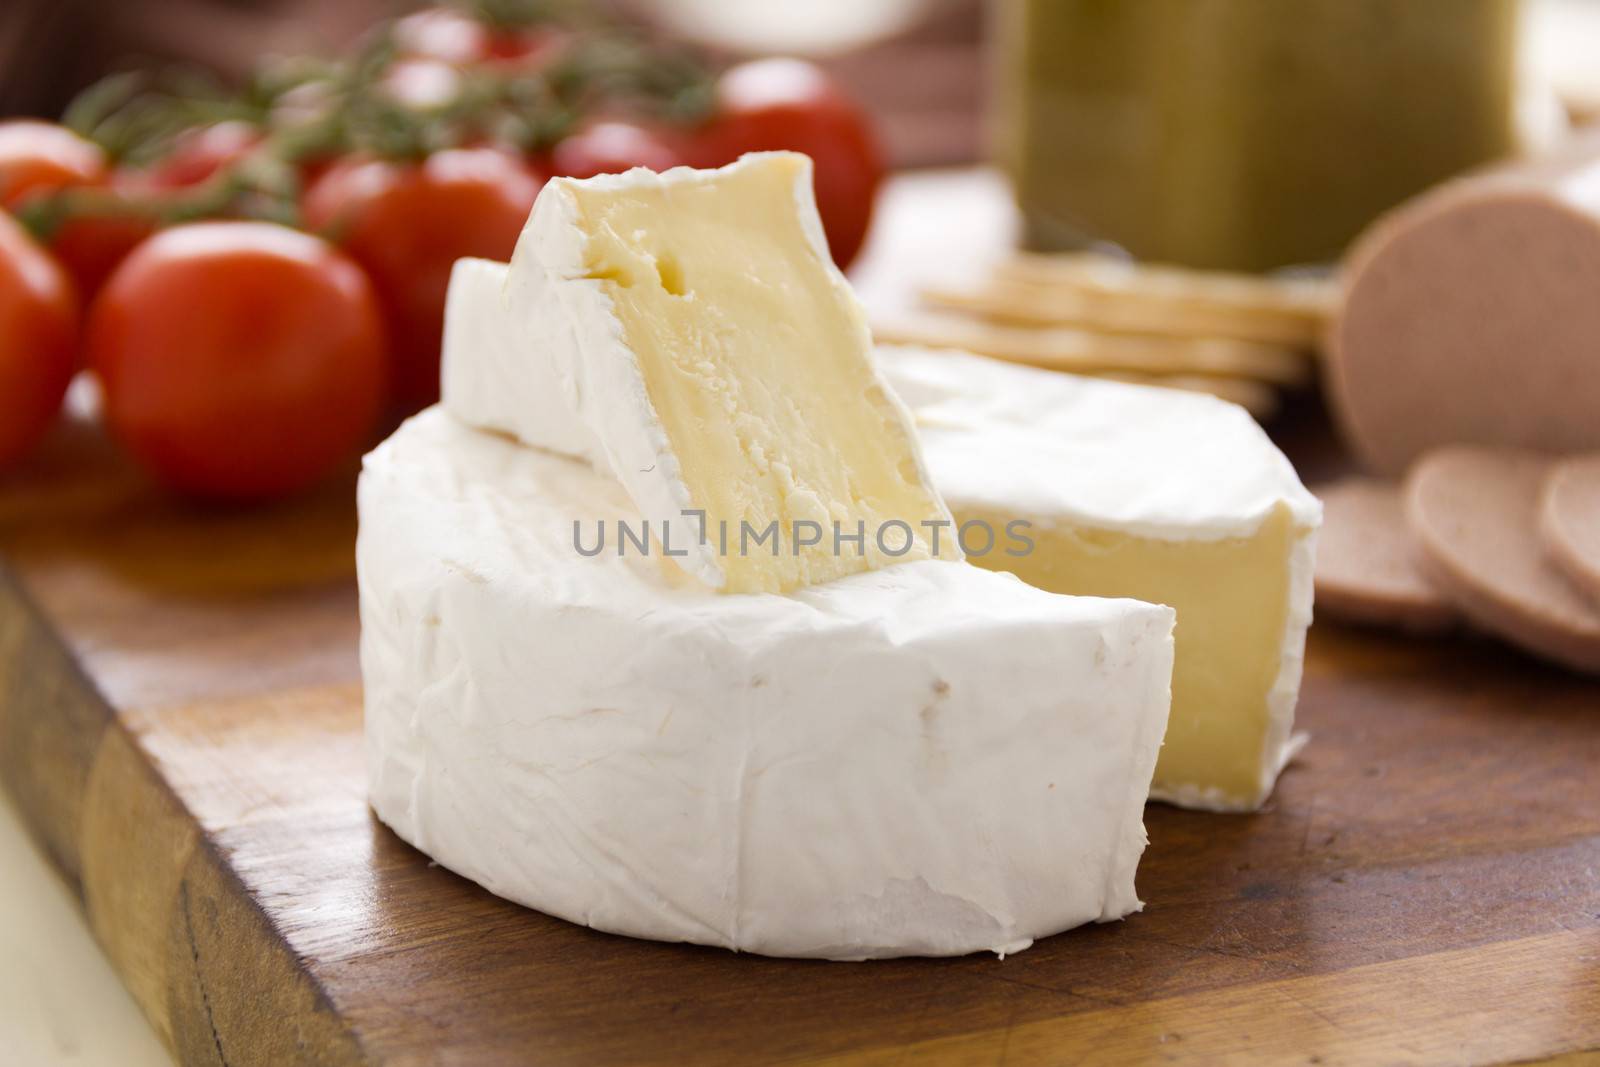 Delicious creamy camembert cheese with crackers and cherry tomatoes.